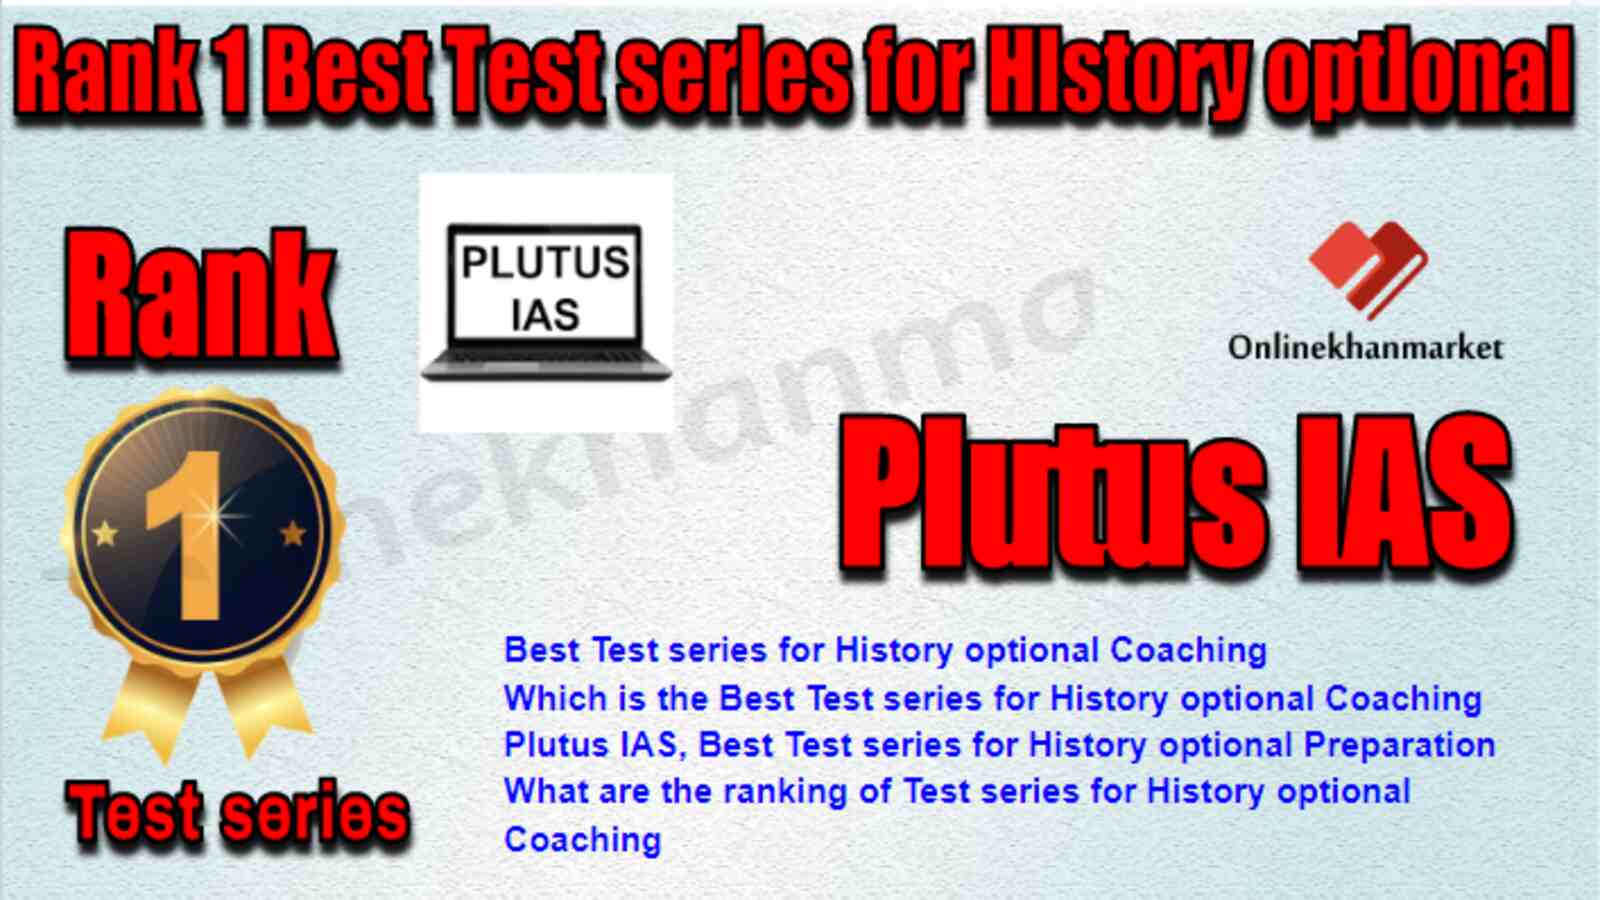 Rank 1 Best Test series for History optional